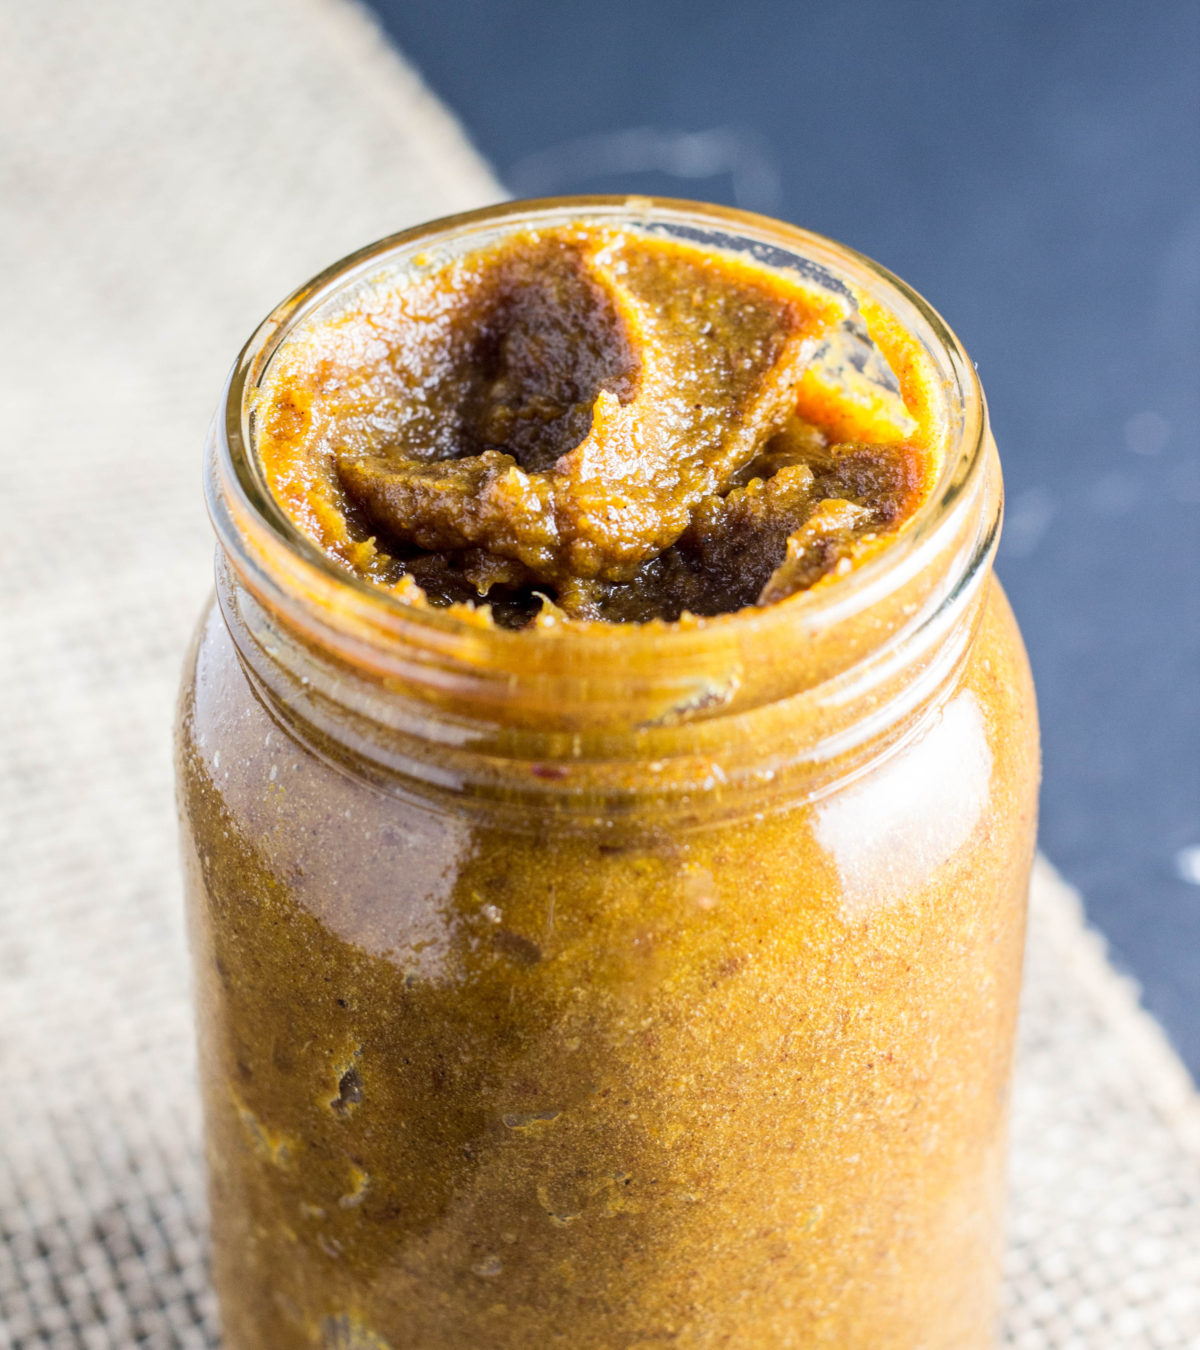 5 Minute Spiced Pumpkin Butter-only requires 3 ingredients and no cook time. Super simple and tastes amazing. No added sugar, vegan, and gluten free.